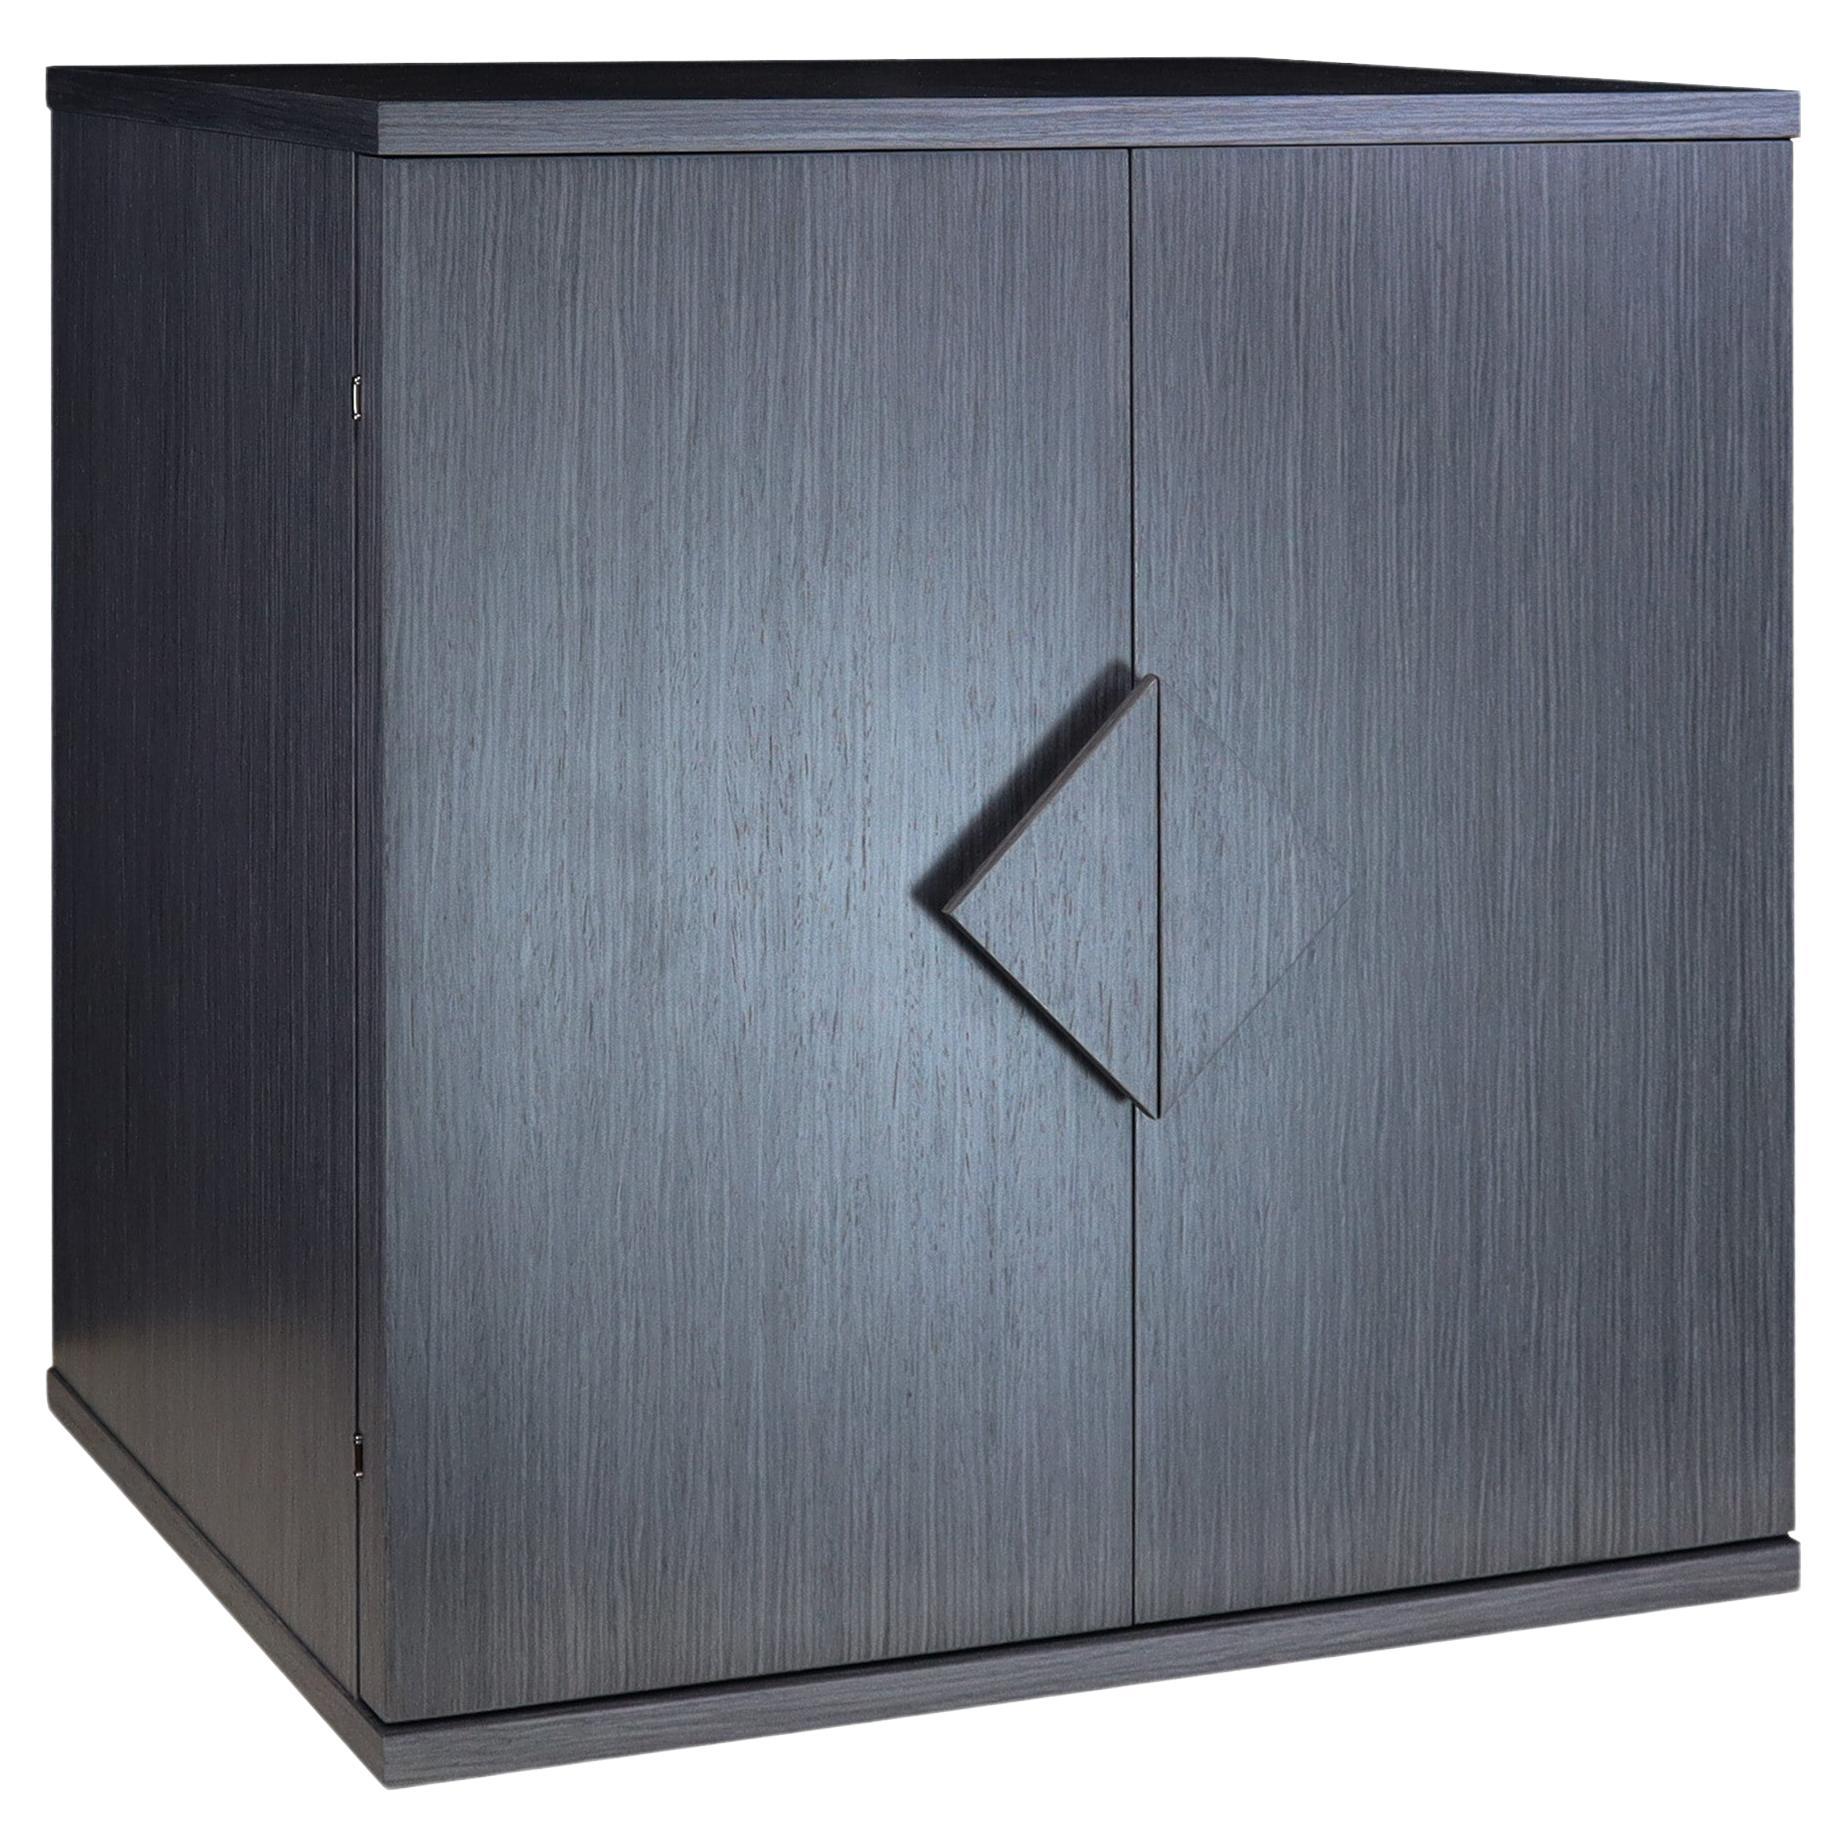  Forziere Rovere Contemporary Chest Safe in Grey Oak by Agrest